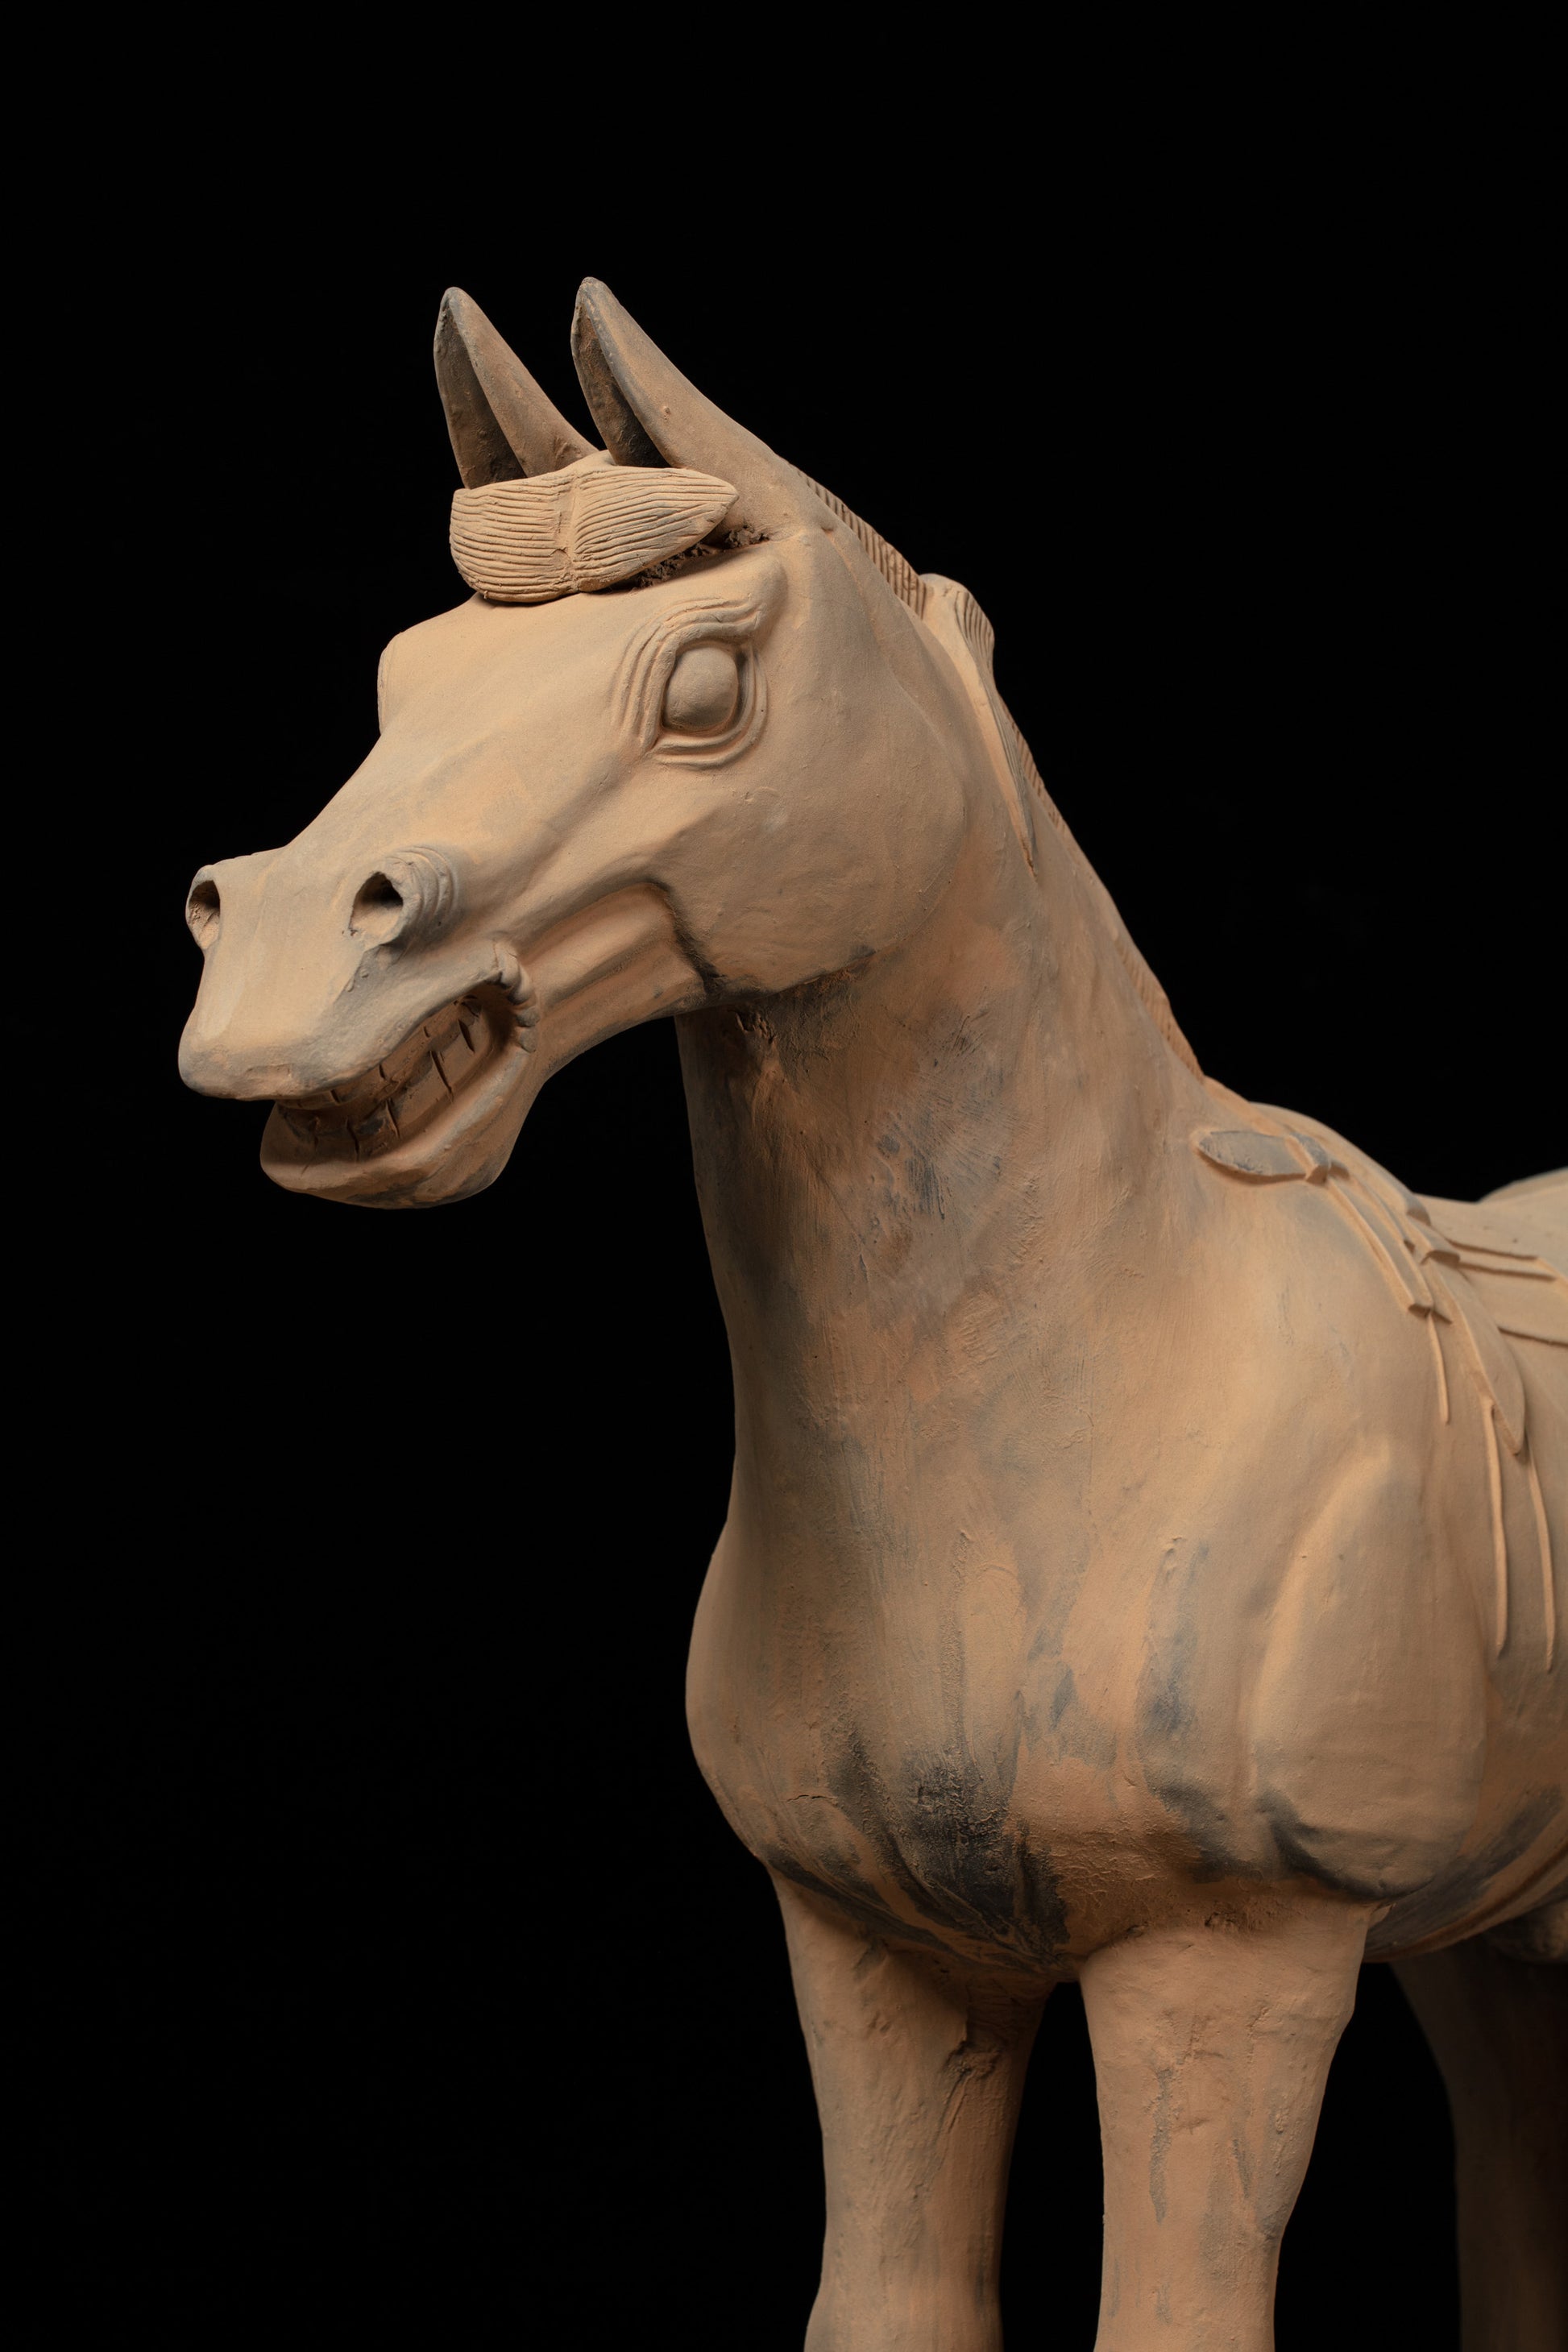 70CM Horse - CLAYARMY -Dynamic angle capturing the regal presence and intricate detailing of our 70CM Clayarmy Terracotta Horse.